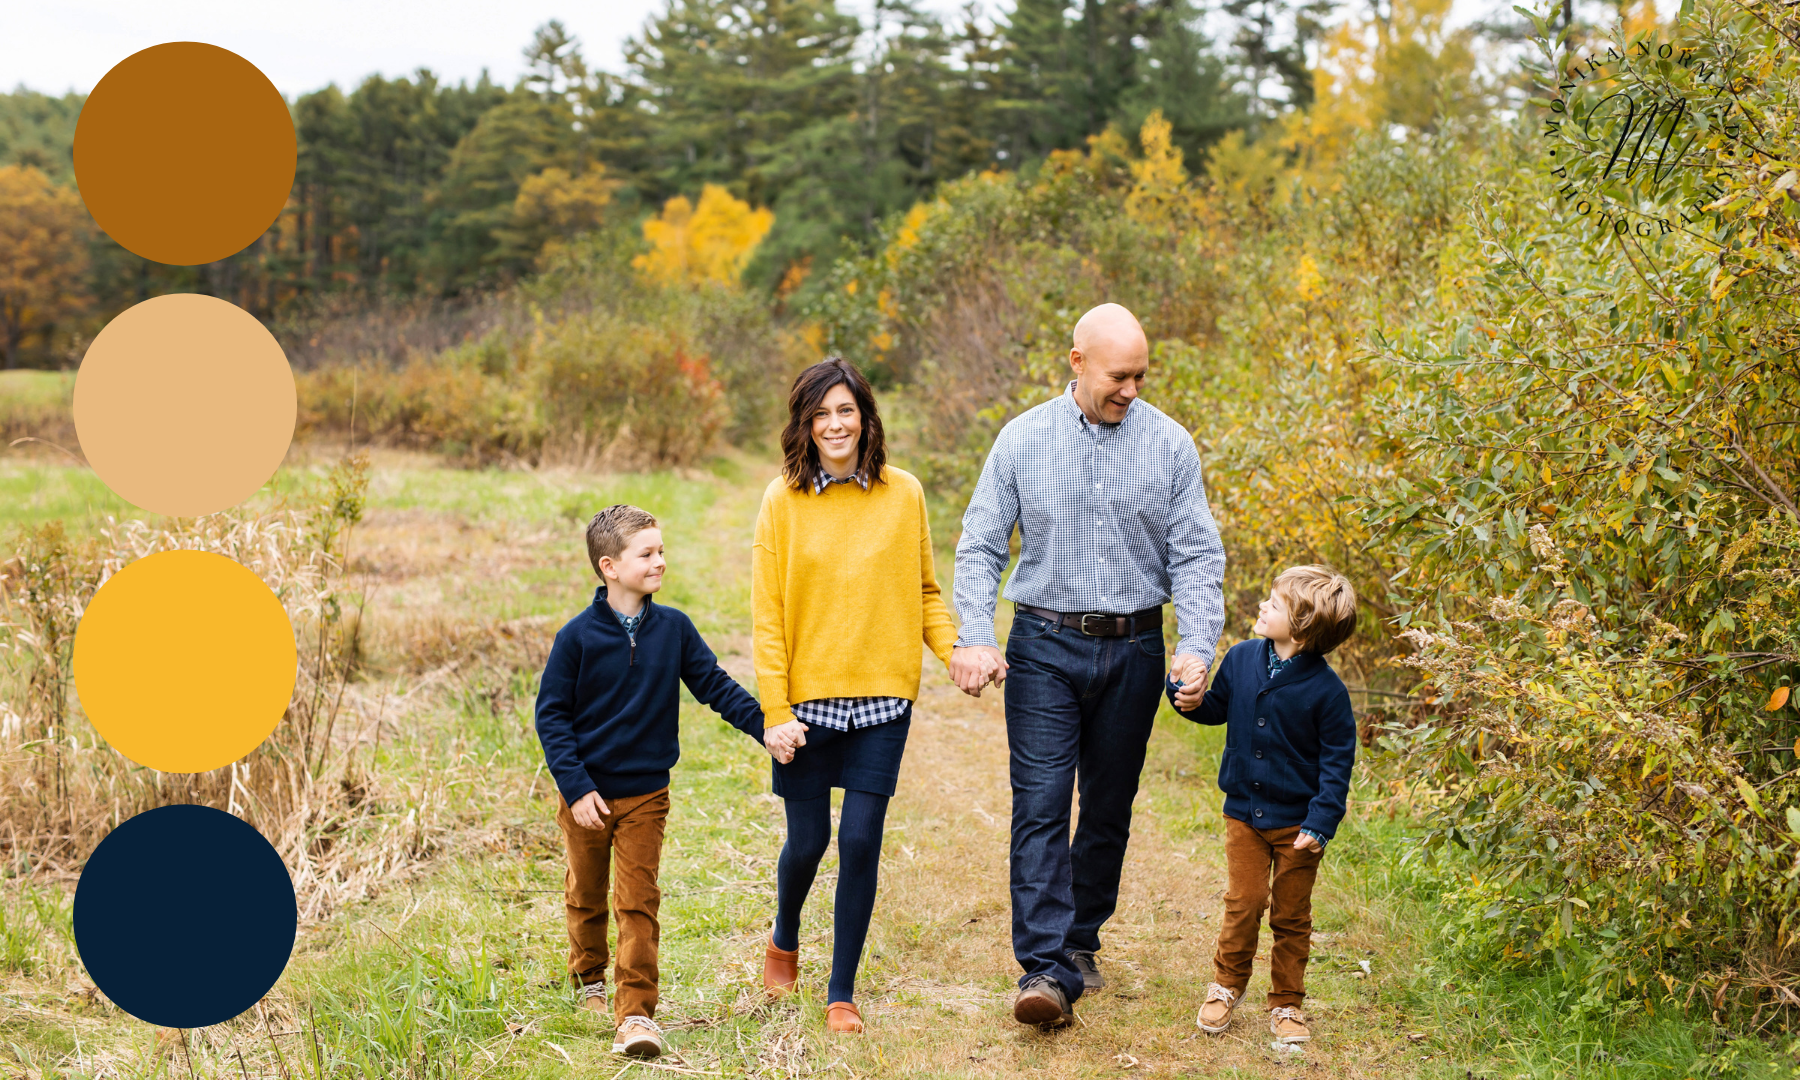 What To Wear To Your Family Portrait Session - Monika Normand Creative LLC